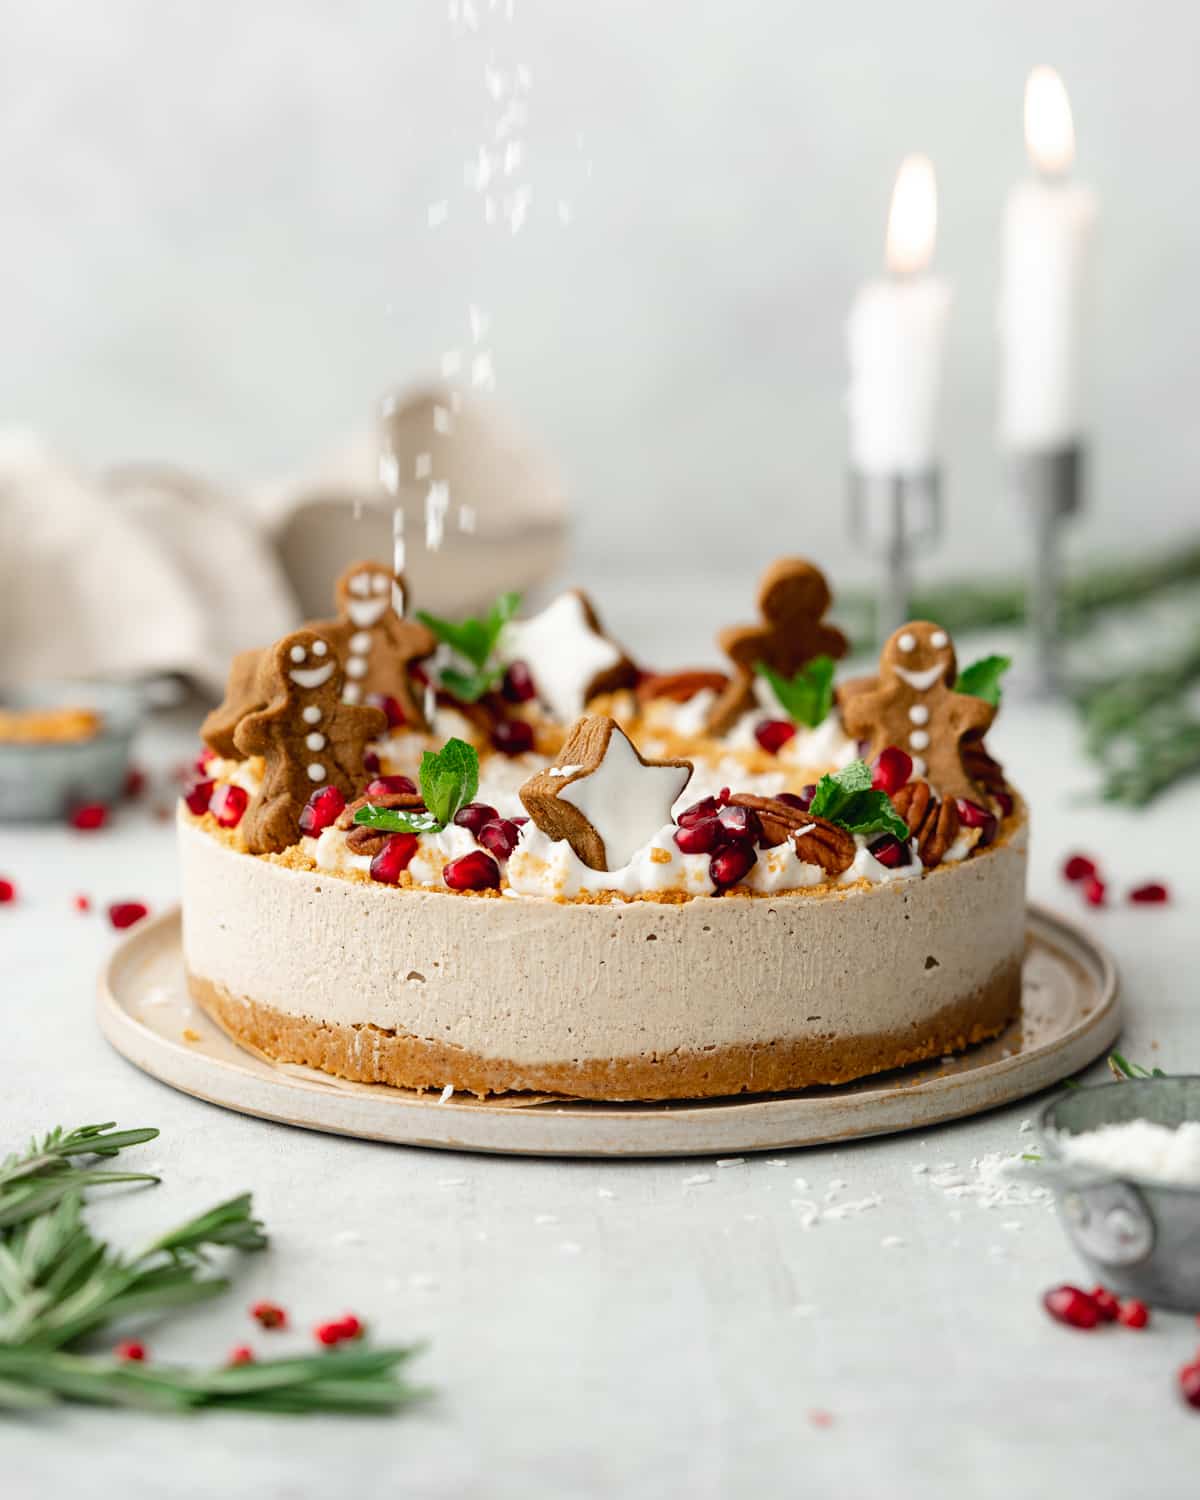 gingerbread cheesecake with gingerbread cookies on top and lit candles in the background.